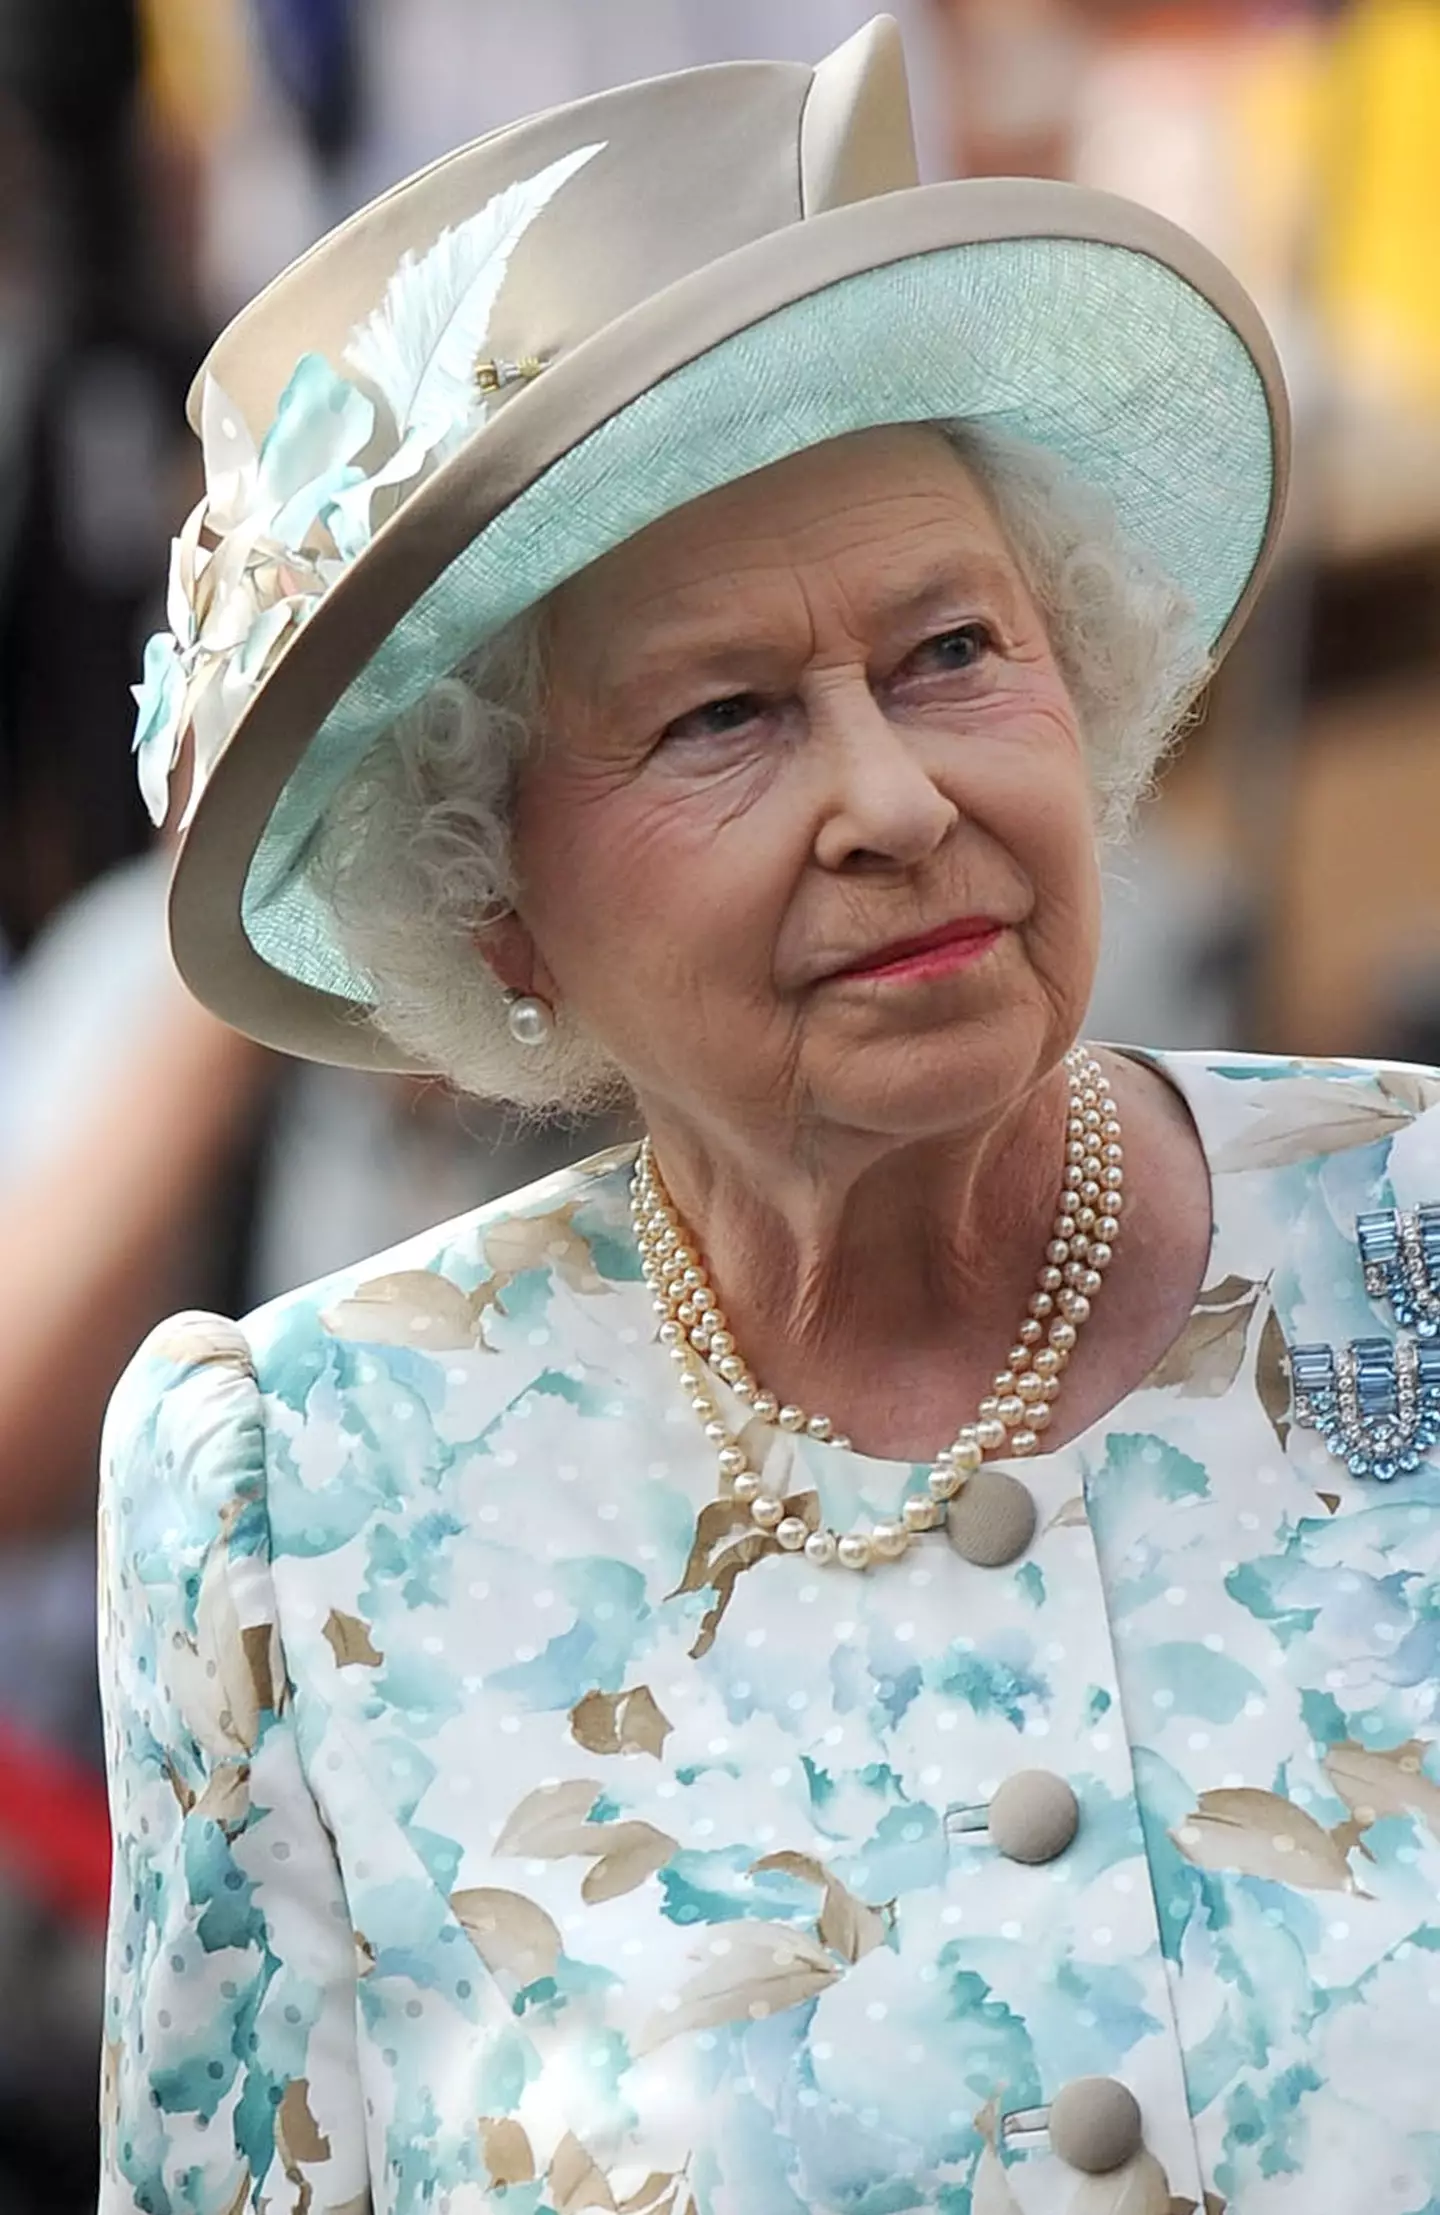 The Queen passed away peacefully at her home in Balmoral.